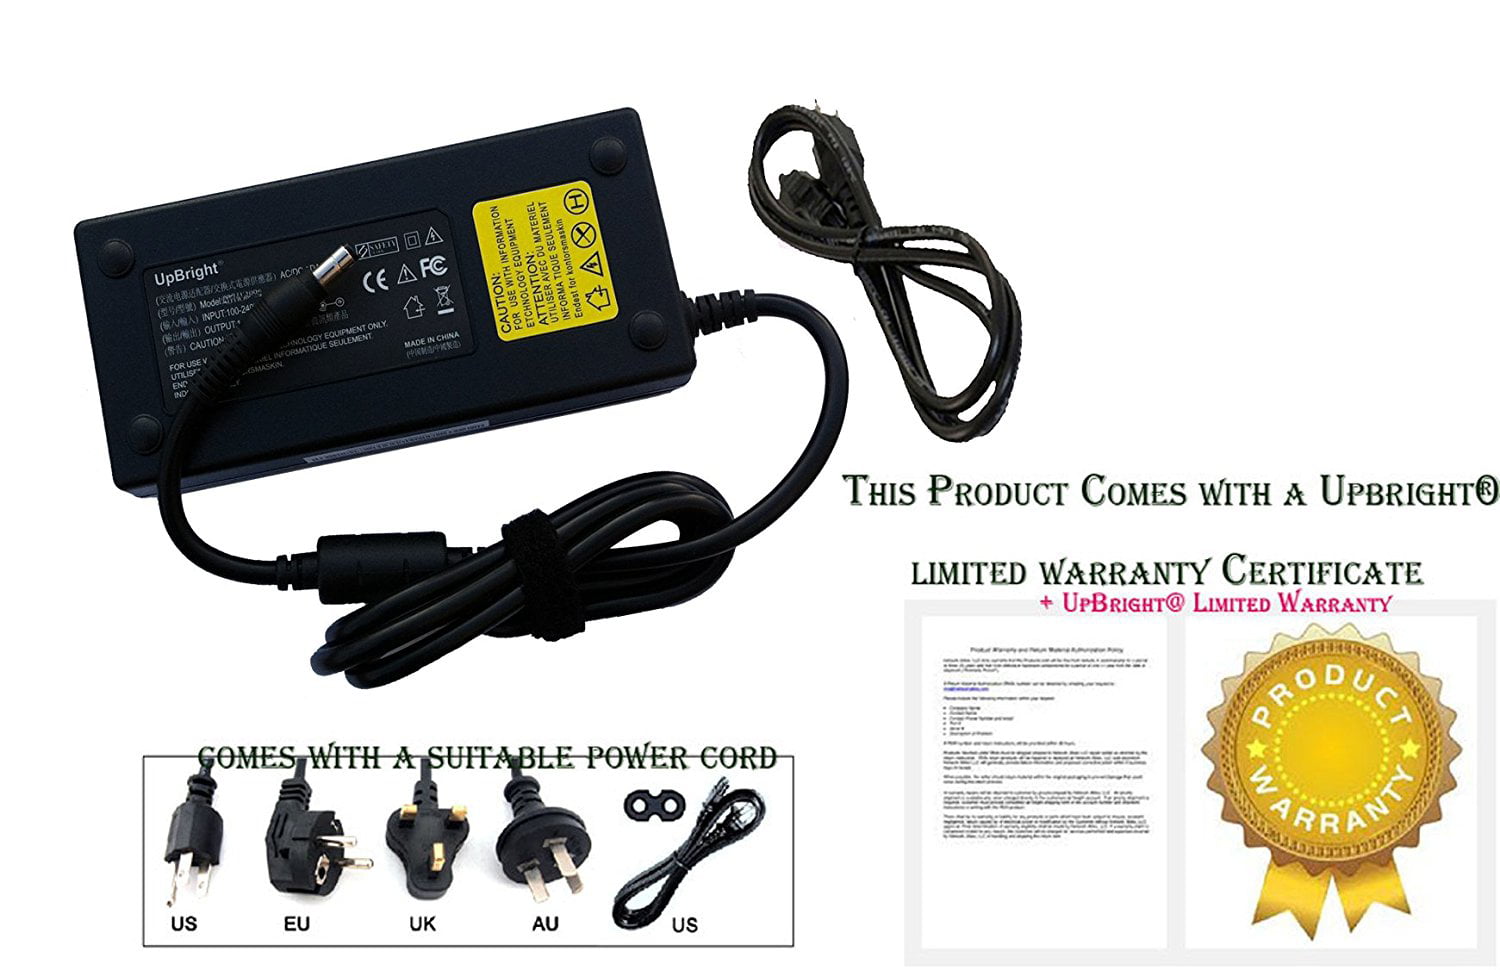 5V or 12V AC Adapter Works with Belkin N Wireless Router F5D8236-4 Power Supply Charger